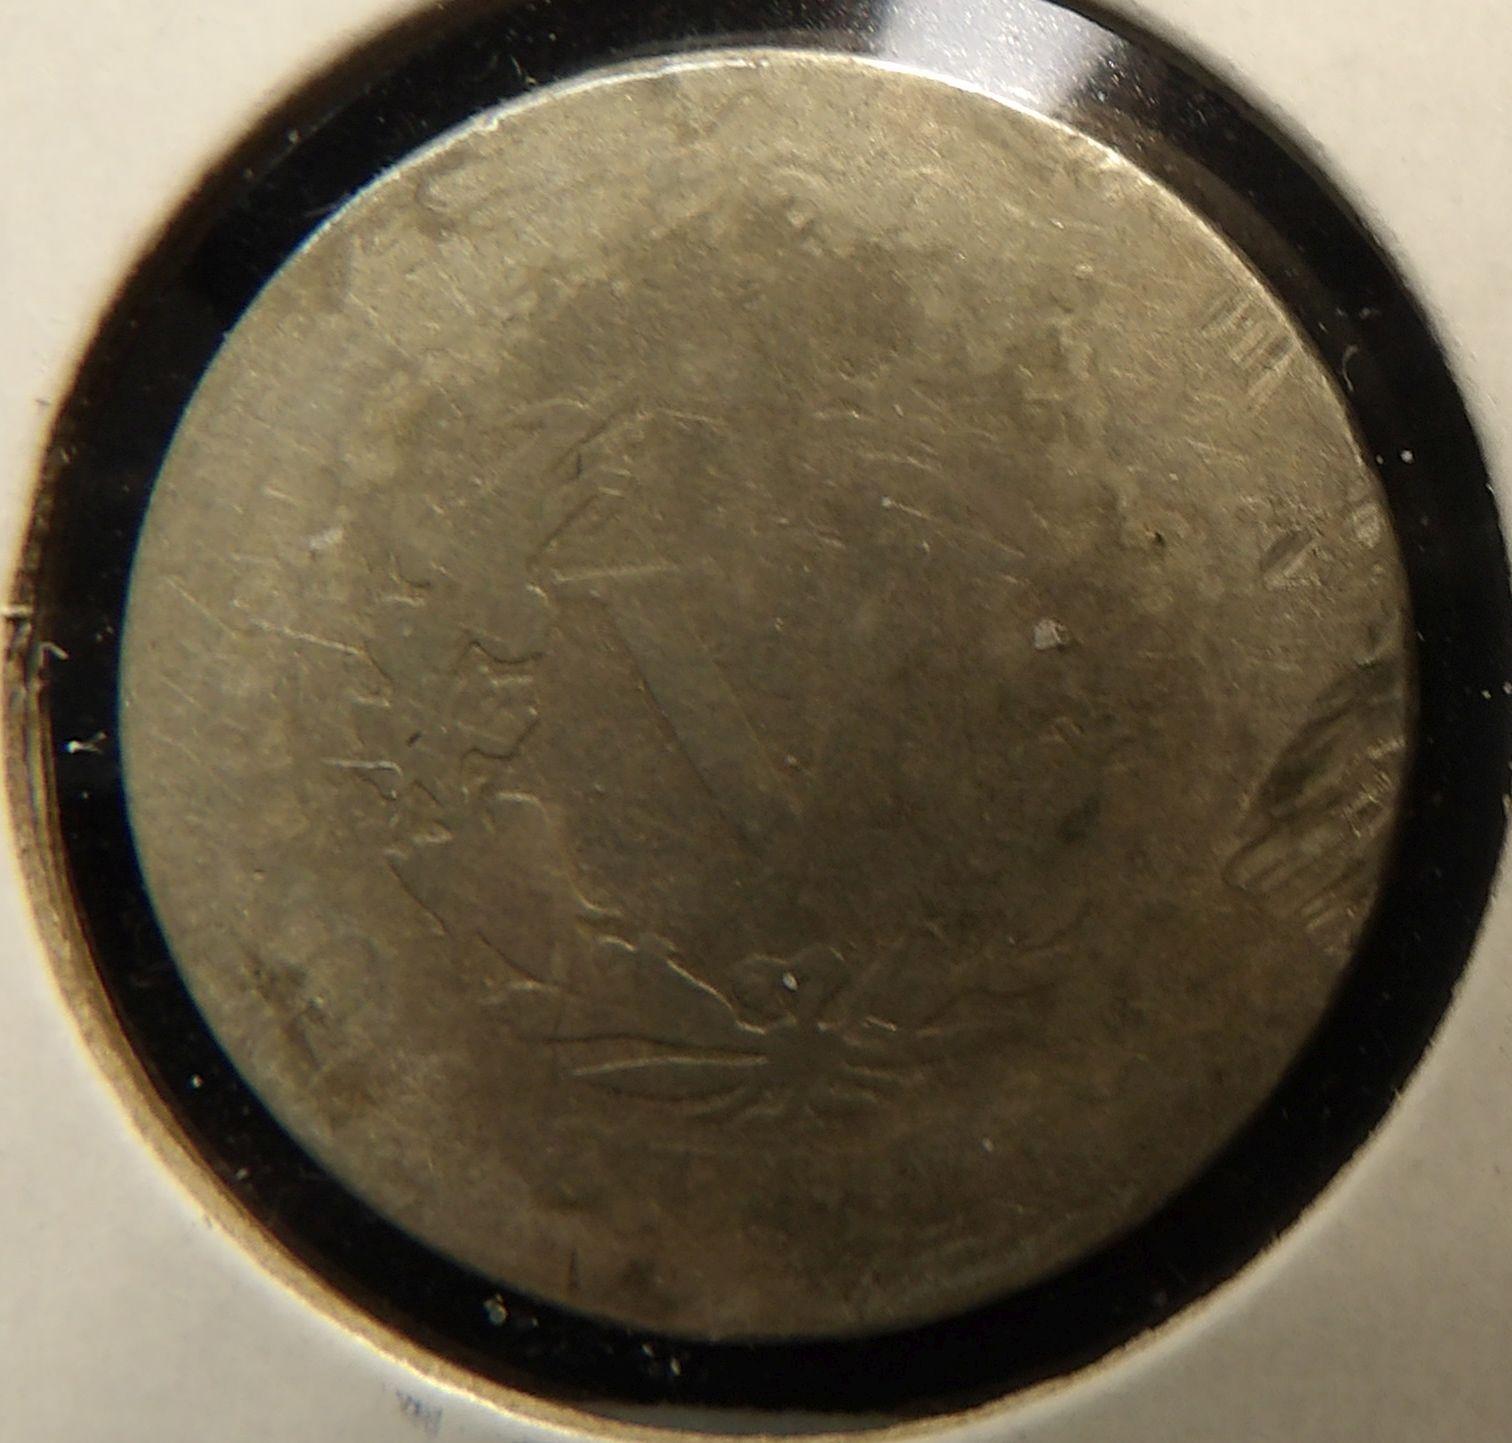 1886 Liberty Nickel - Rare Date! A low grade hole filler with some reverse damage, Poor to Fair cond